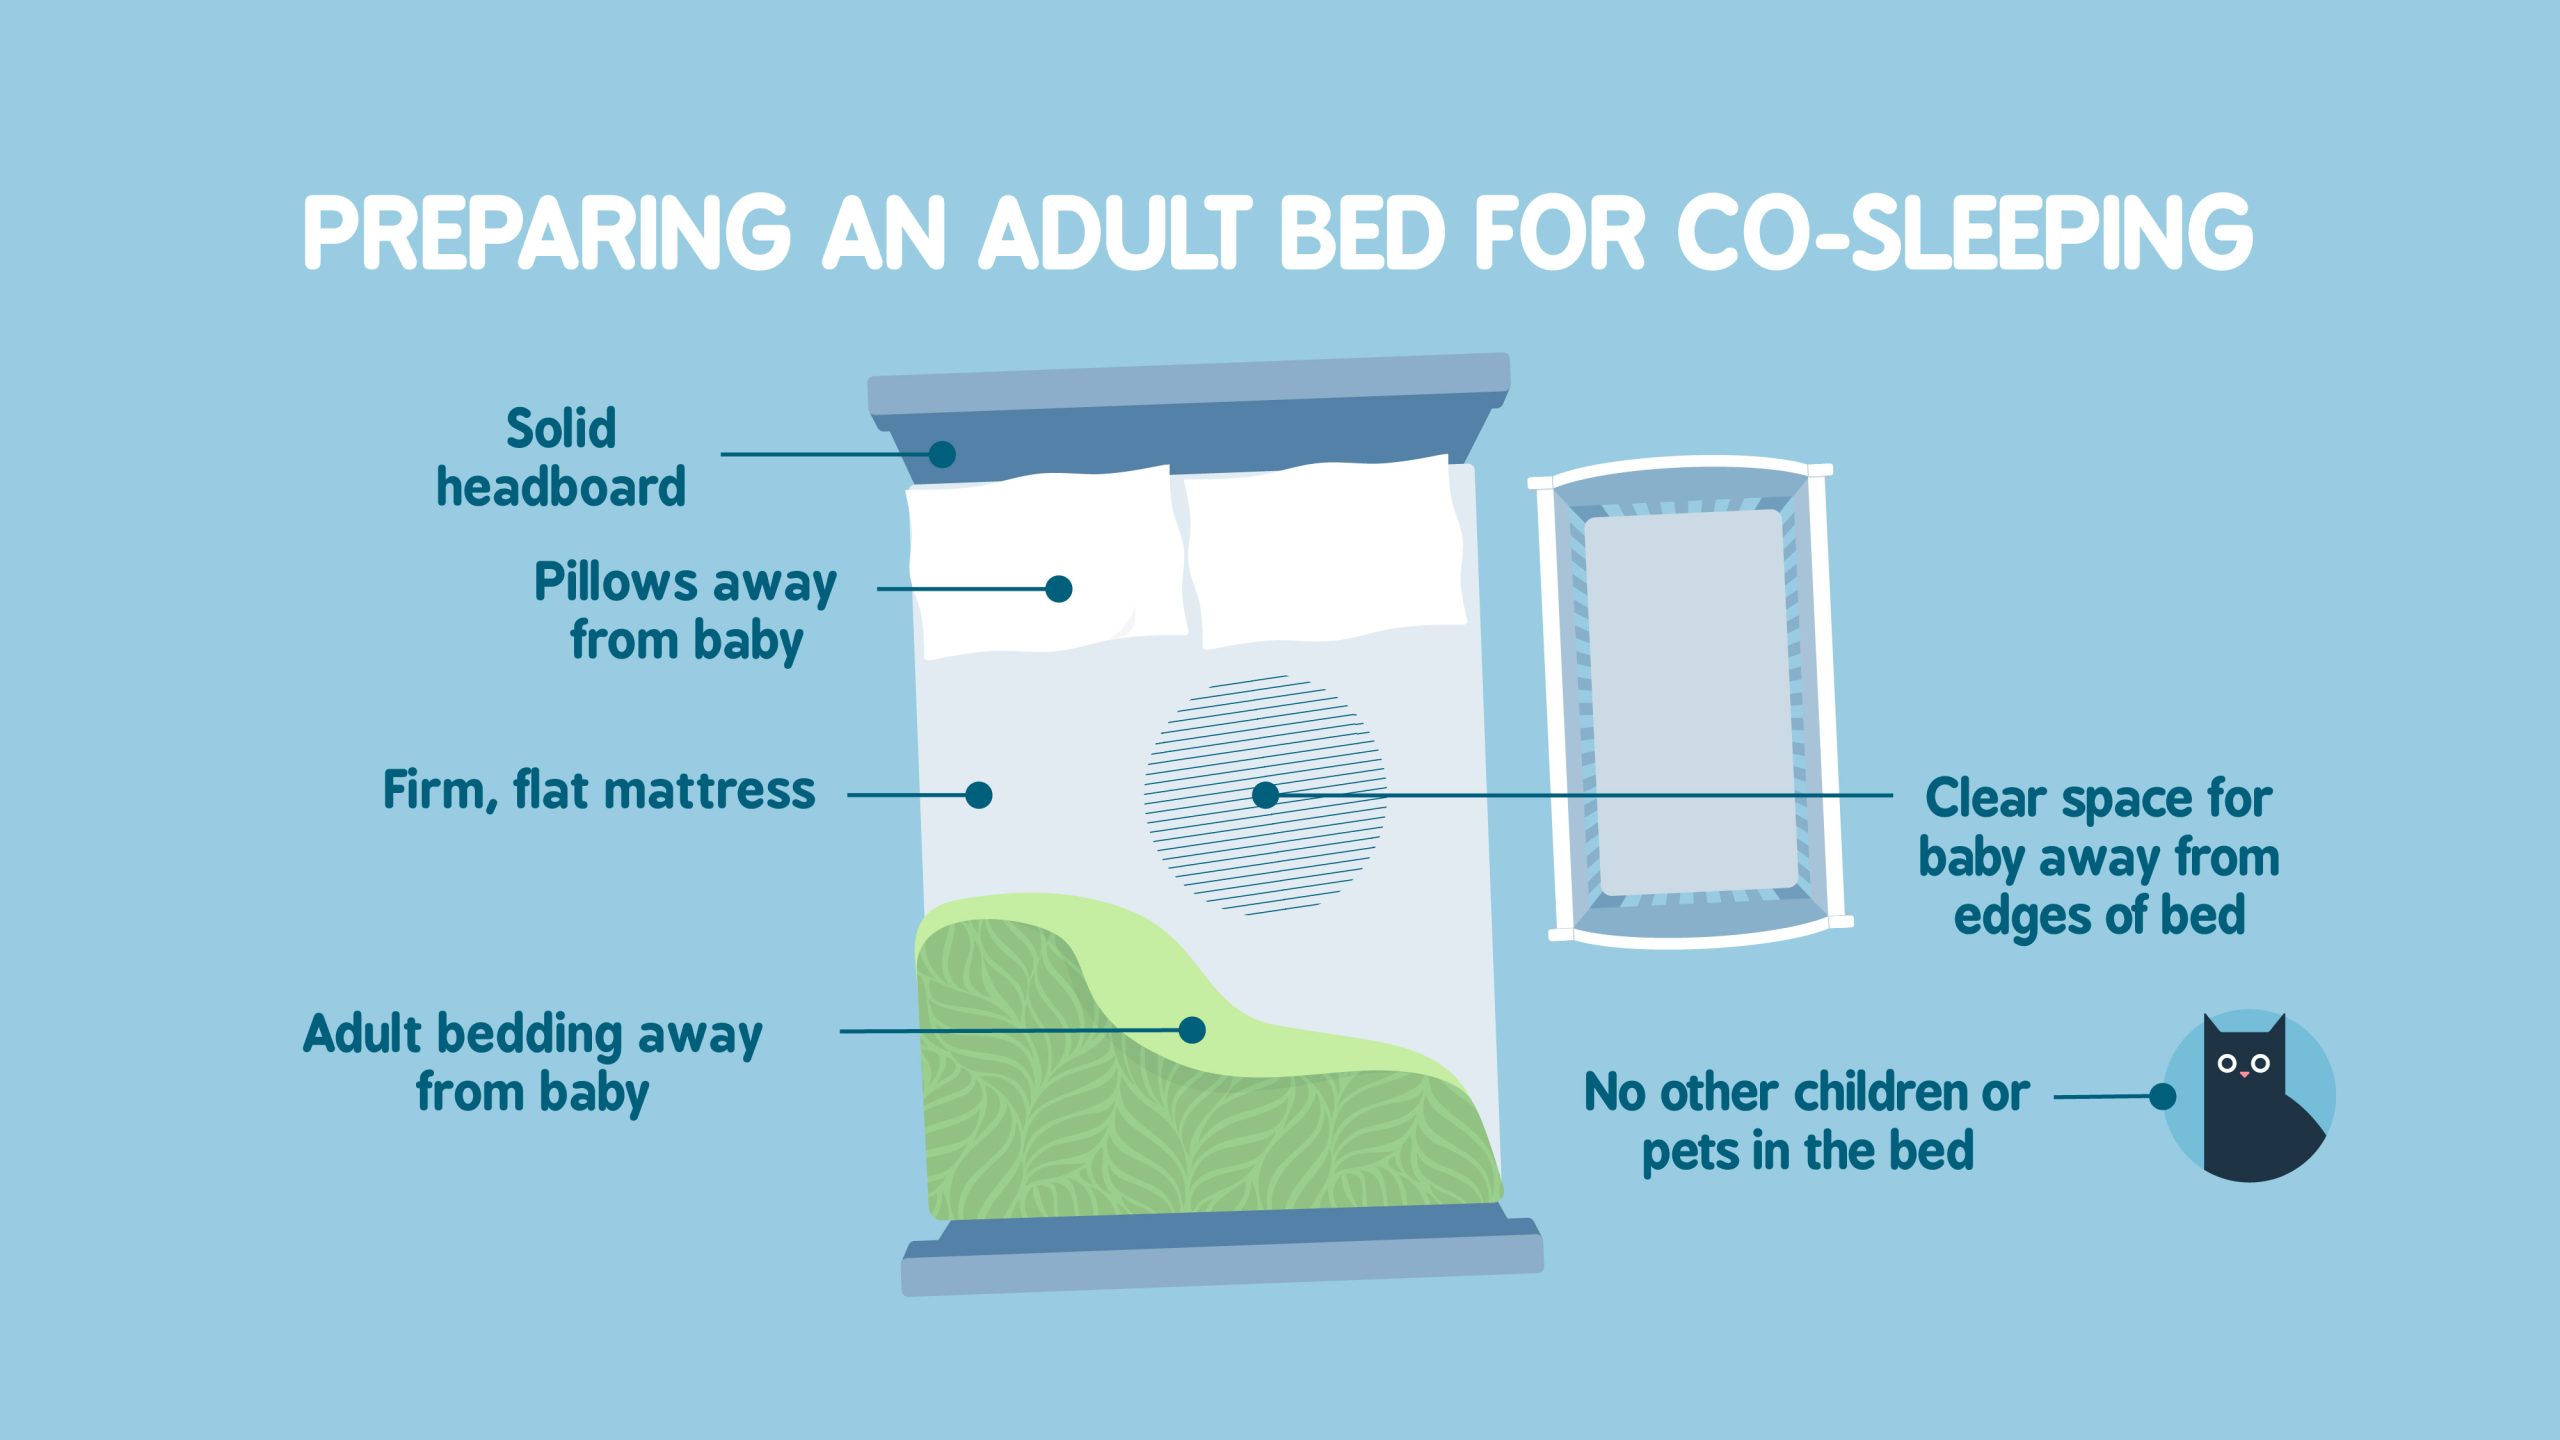 preparing an adult bed for co-sleeping - away from home